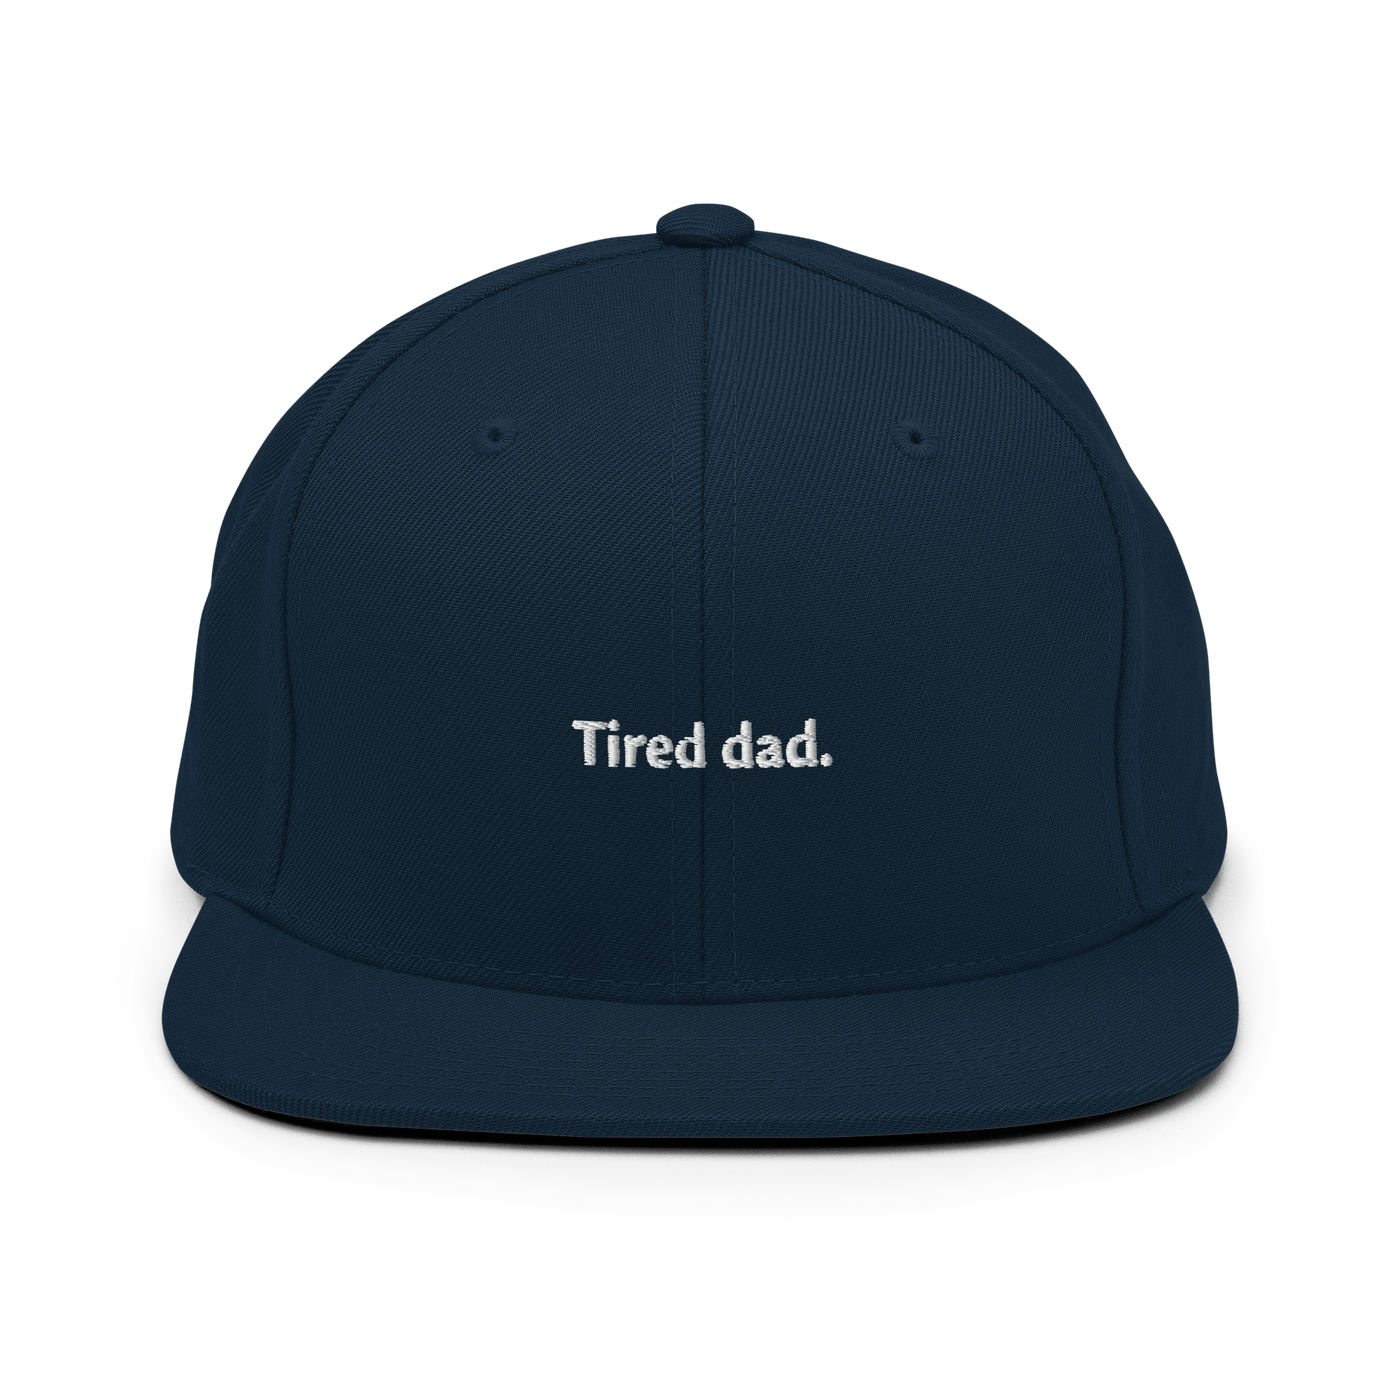 Tired dad Snapback - Dark Navy - - Just Another Cap Store